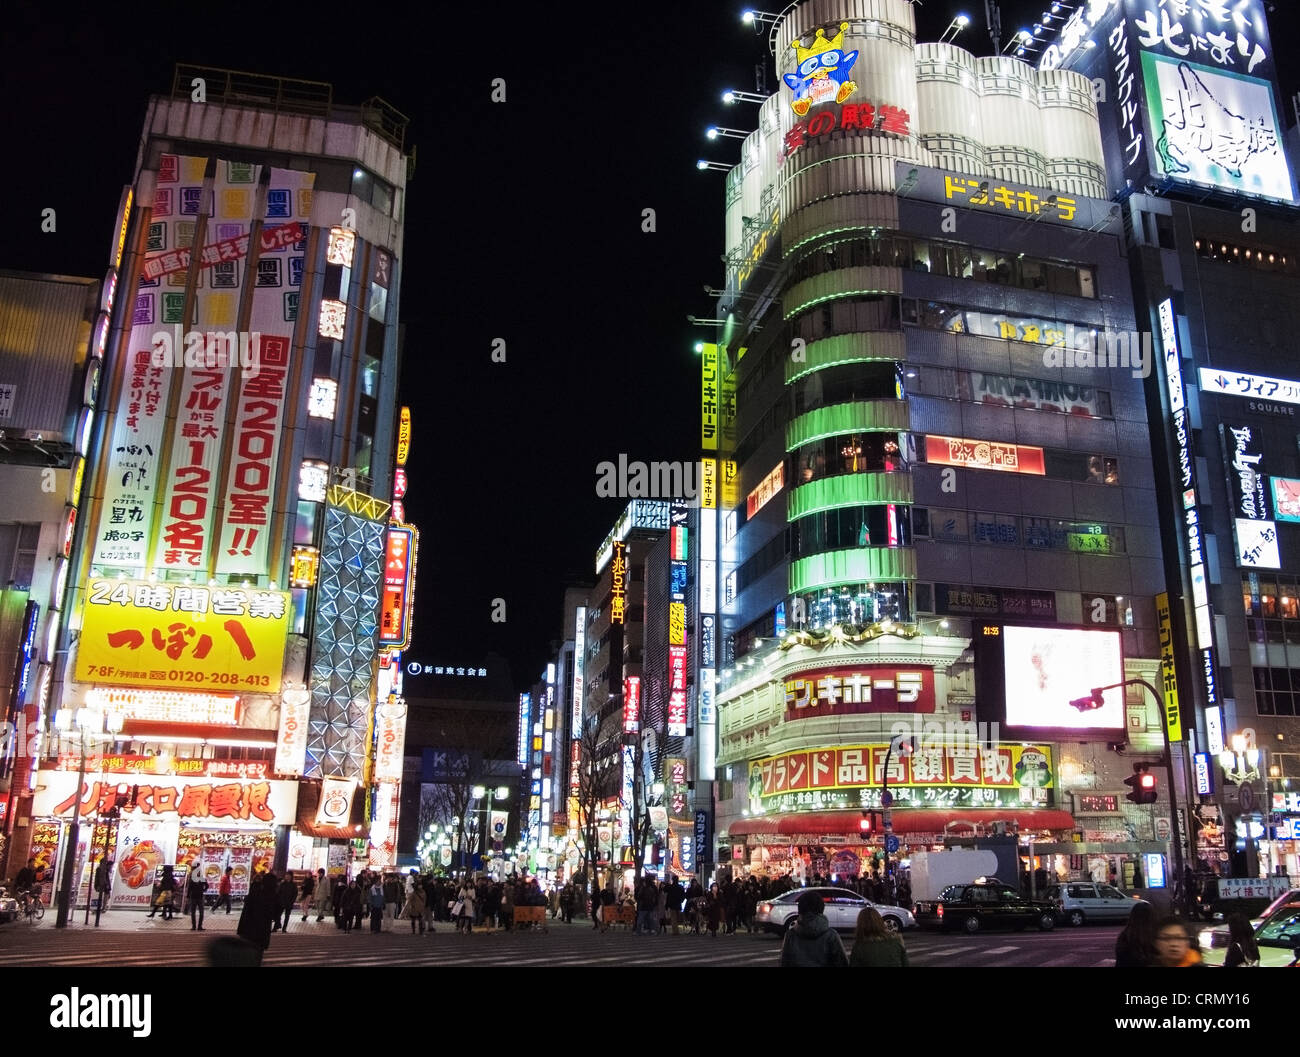 Night scene of neon covered buildings in the Shinjuku district of Tokyo, Japan Stock Photo